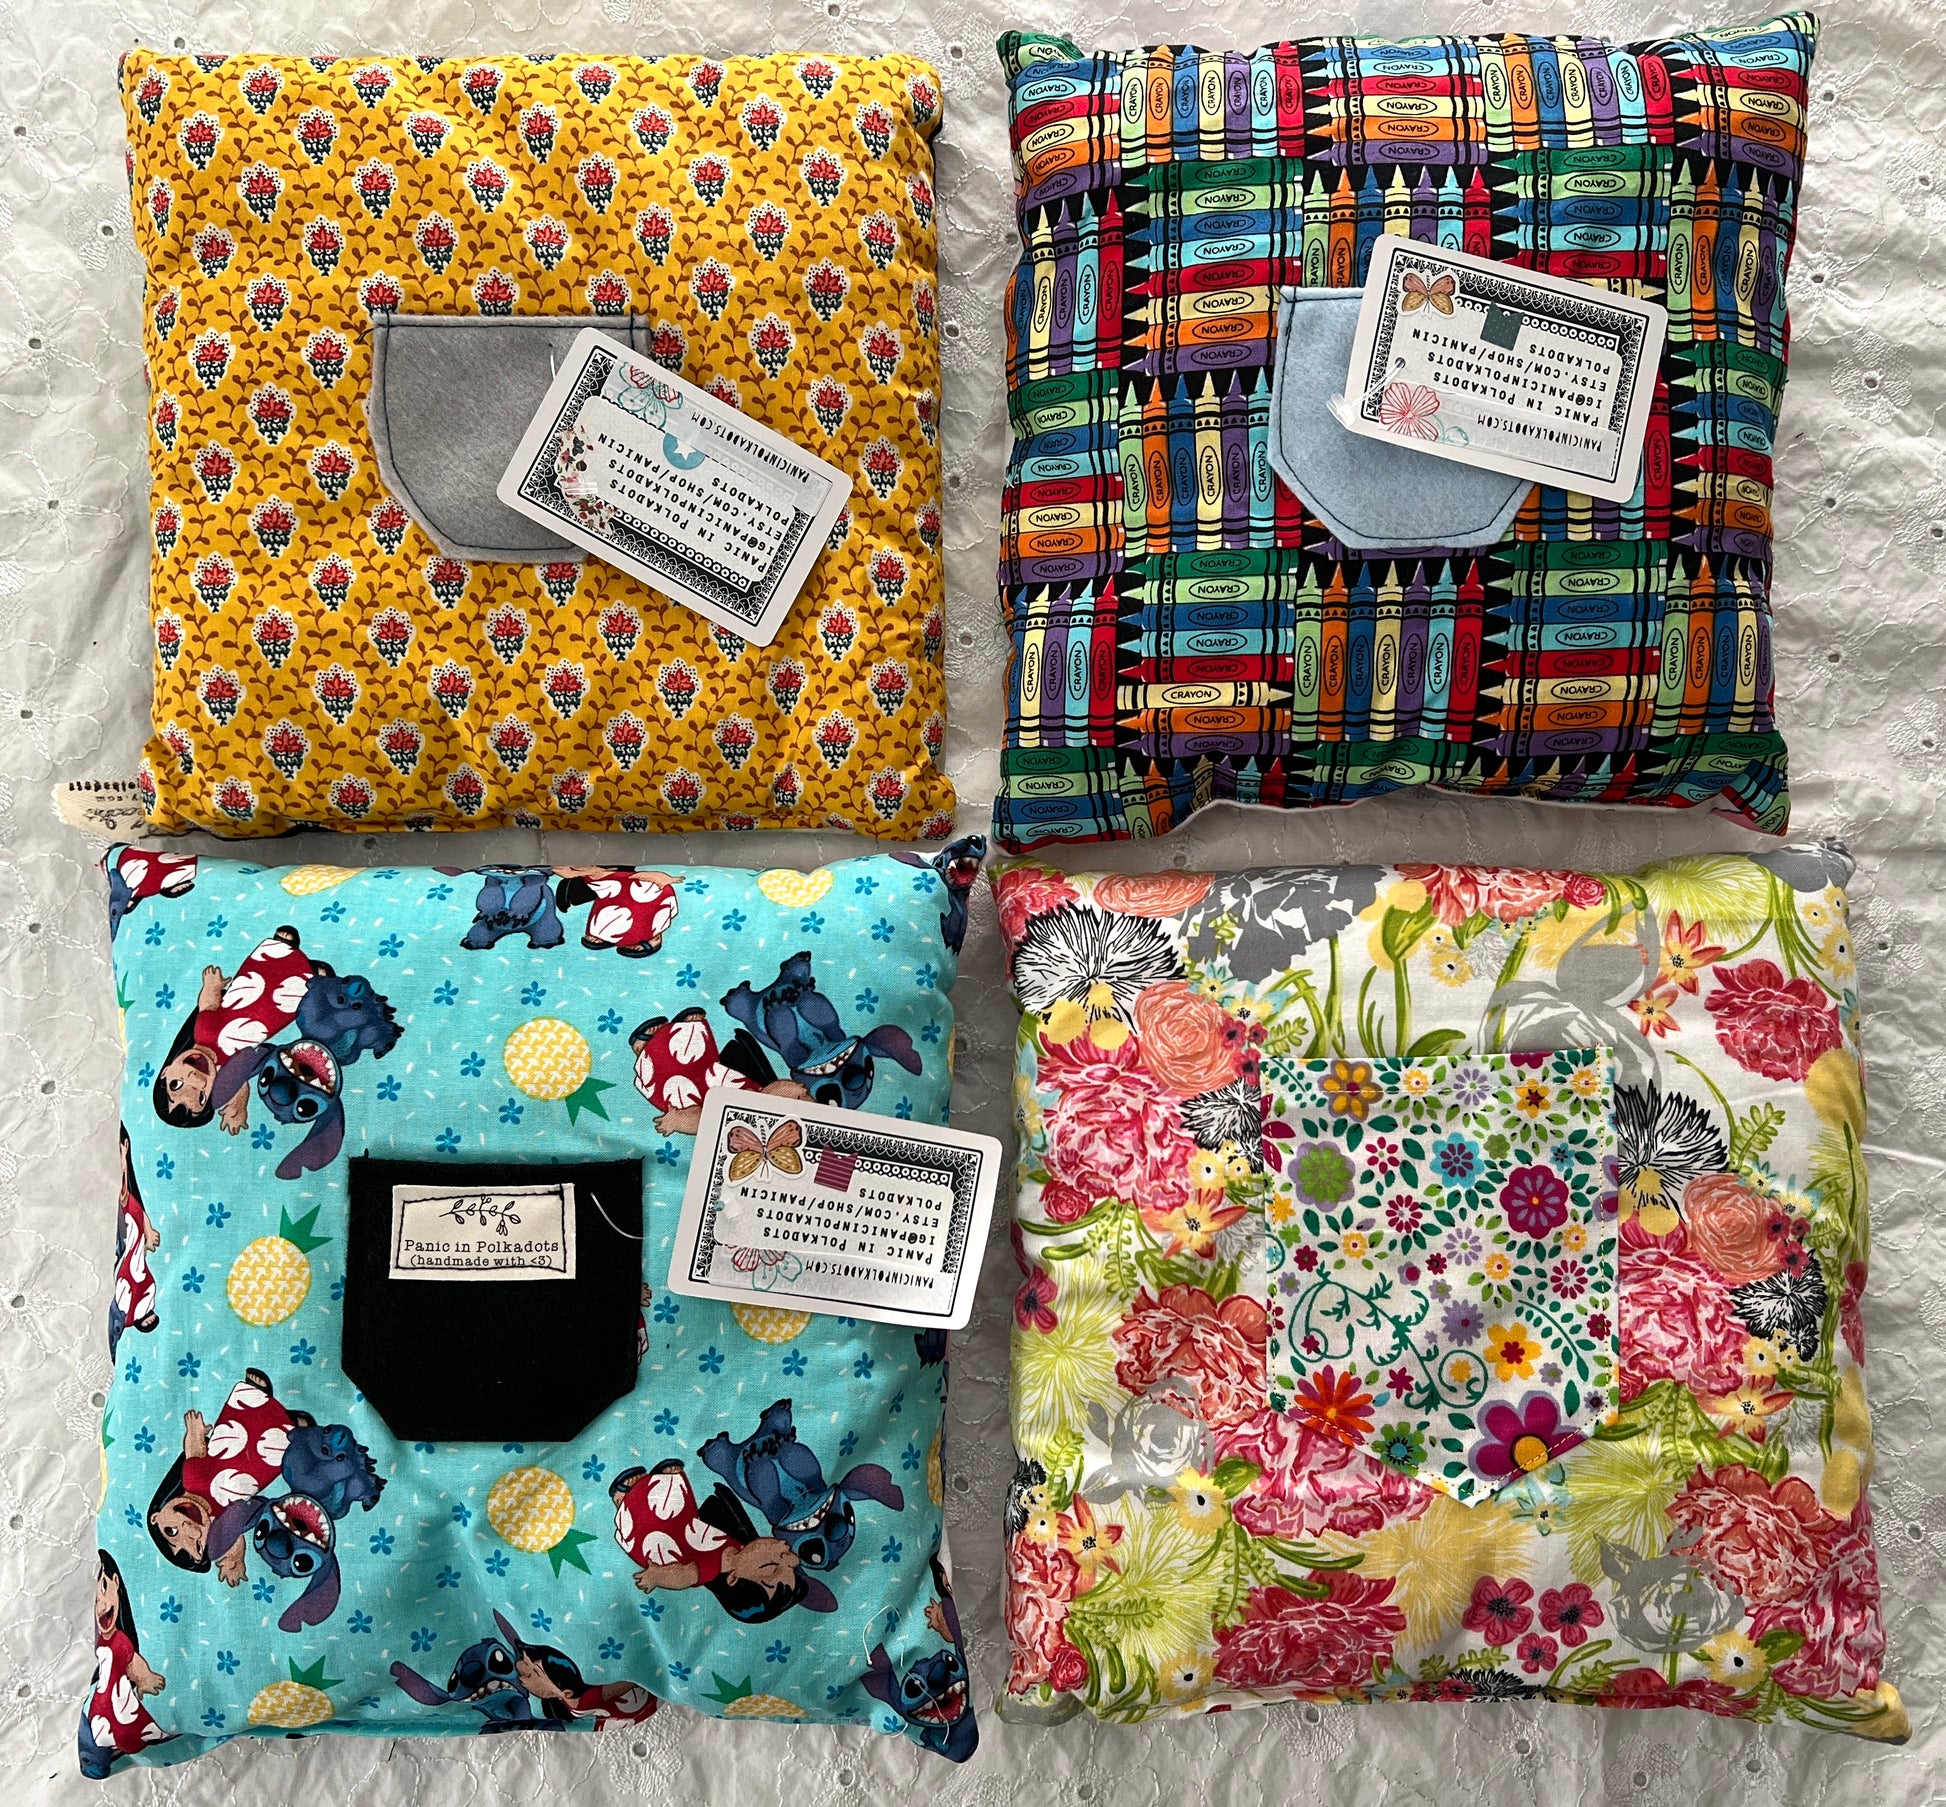 A group photo of little pillows showing the pocket on back for tooth fairy